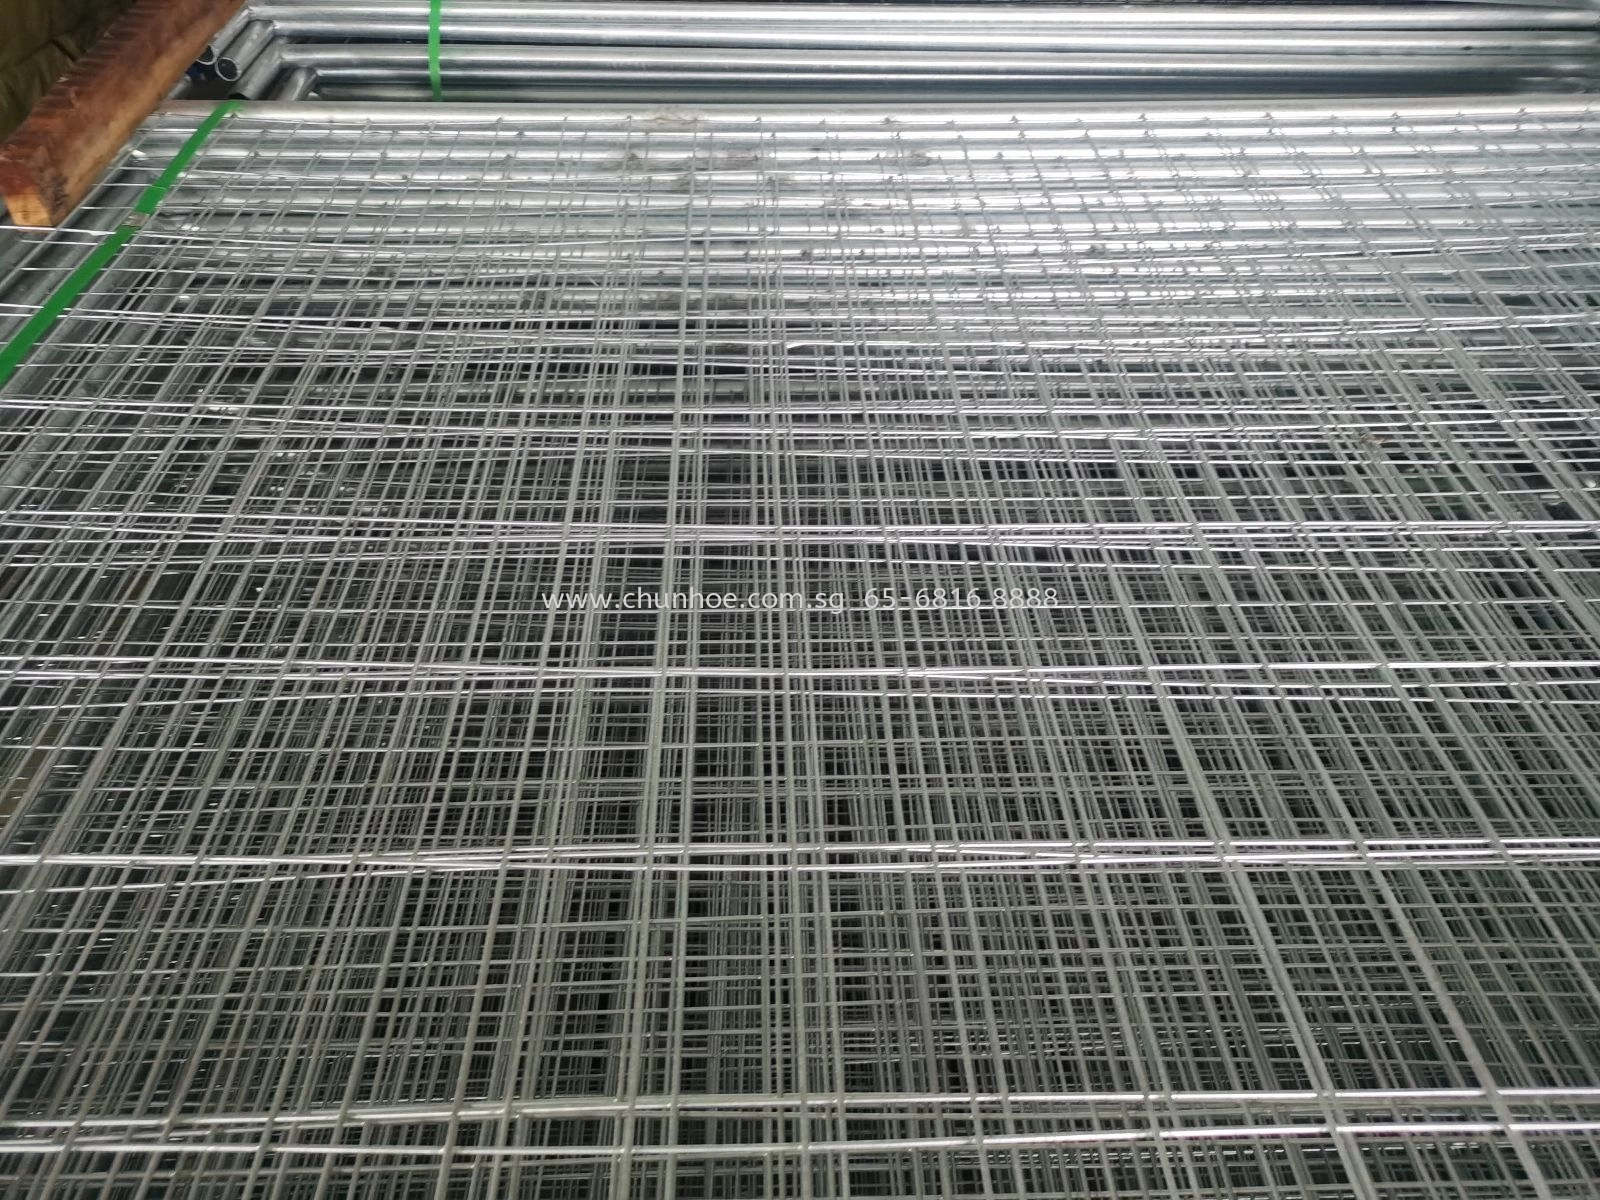 Singapore Welded Carbon Steel Wire Mesh Fencing Singapore Manufacturer,  Supplier, Supplies, Supply | Chun Hoe Pte Ltd